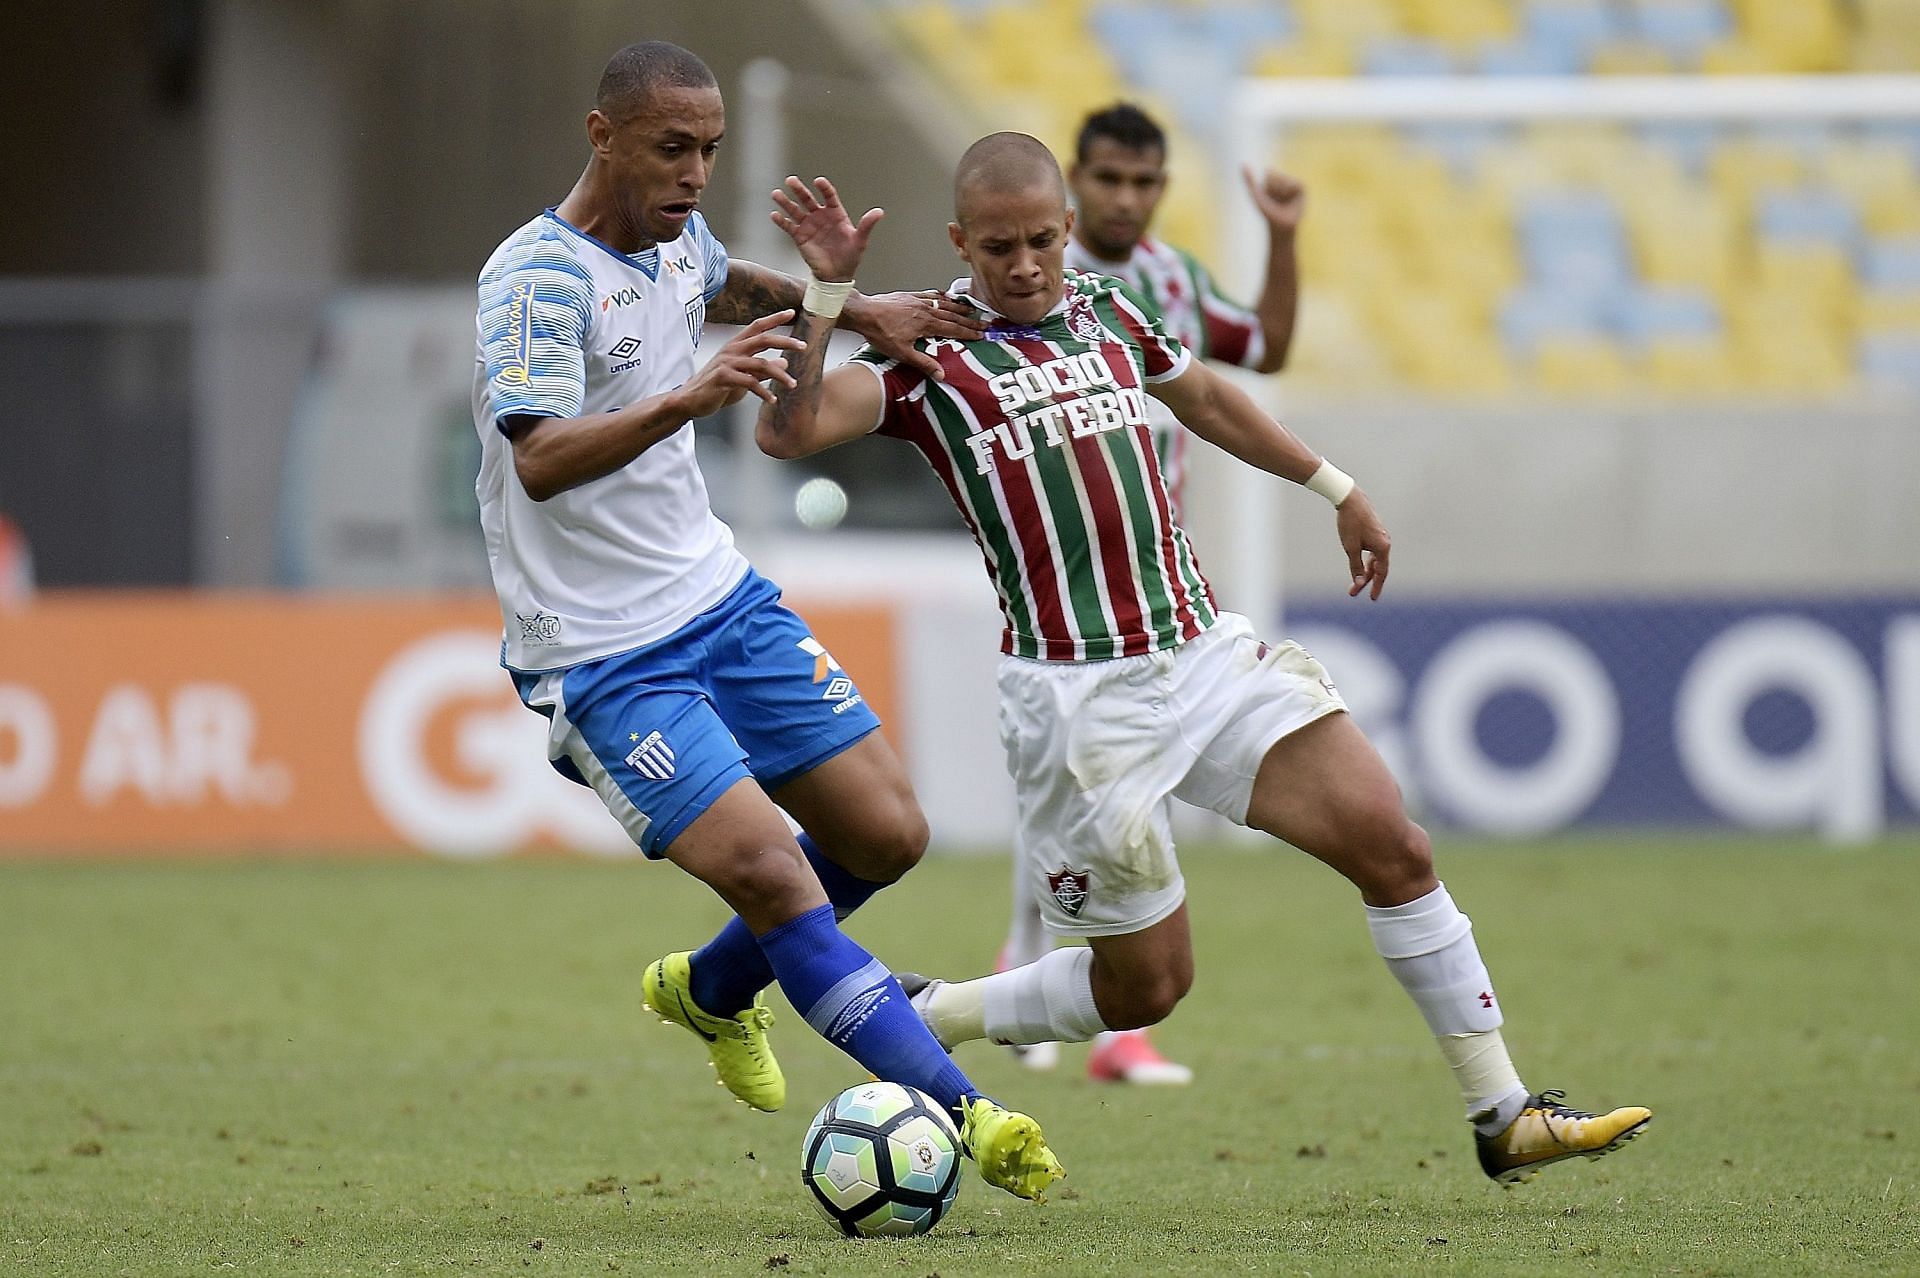 Avai will square of with Fluminense on Monday.